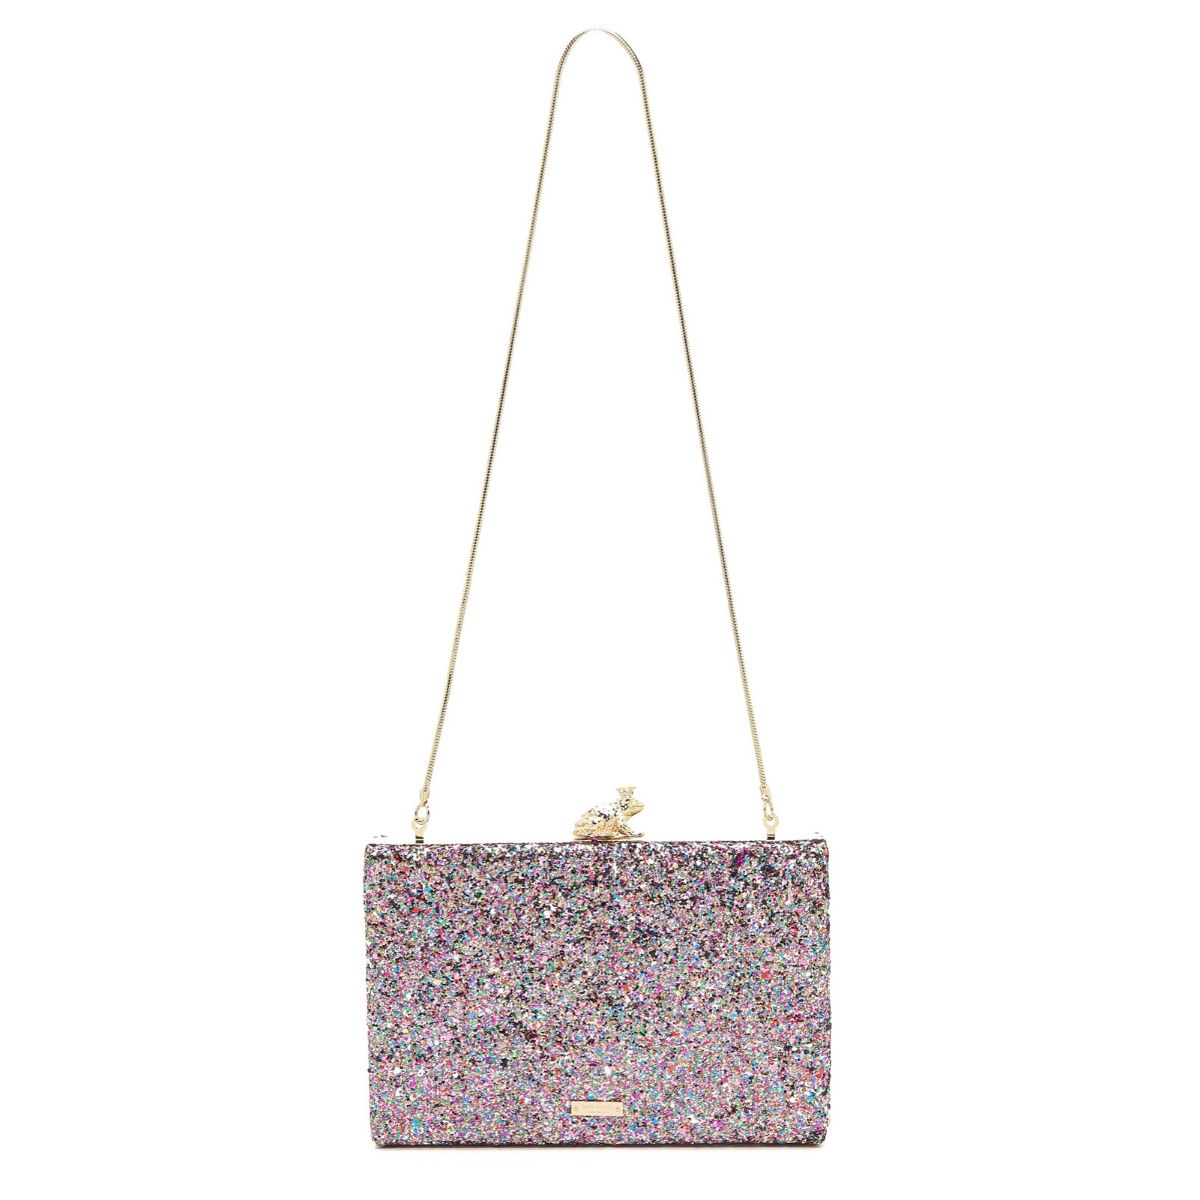 Kate Spade New York Holiday 2020: Whimsical Bags, Glitter Clutches, And A  Sparkly Pavé Cat Ring